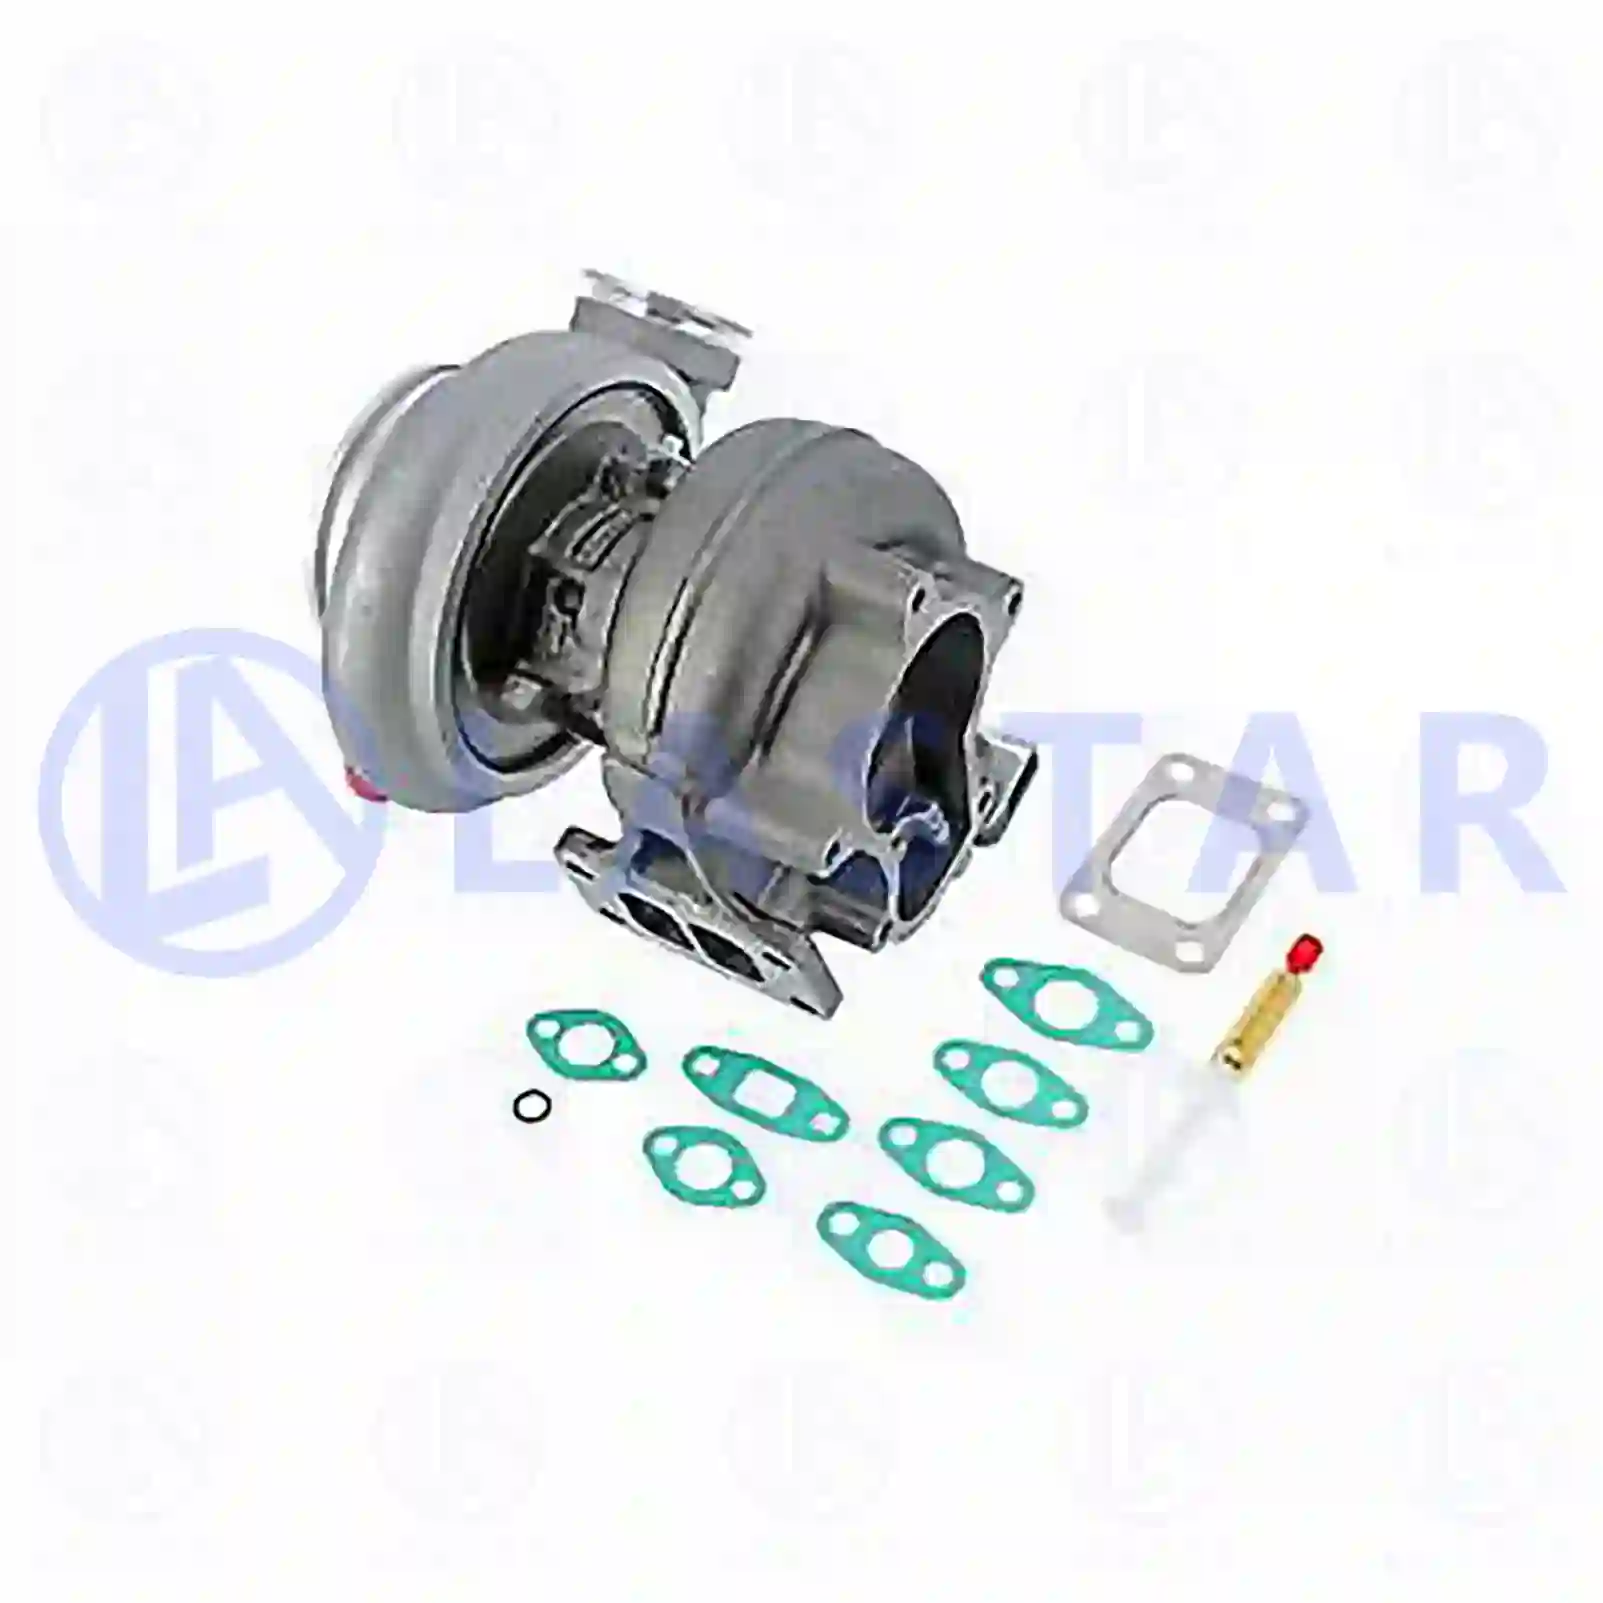 Turbocharger, 77700469, 9302000900100, F930200090010, 51091007618, 51091007619, 51091009618, 51091009619 ||  77700469 Lastar Spare Part | Truck Spare Parts, Auotomotive Spare Parts Turbocharger, 77700469, 9302000900100, F930200090010, 51091007618, 51091007619, 51091009618, 51091009619 ||  77700469 Lastar Spare Part | Truck Spare Parts, Auotomotive Spare Parts